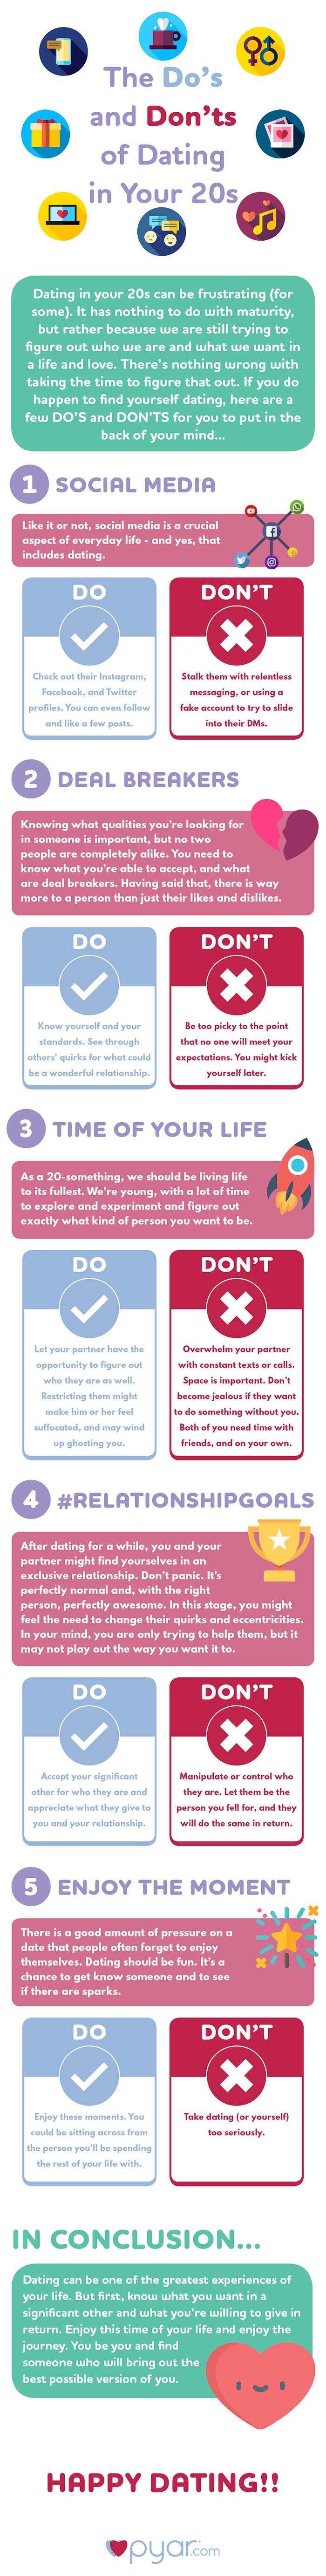 Infographic: Do's and Don'ts of Dating in your 20s